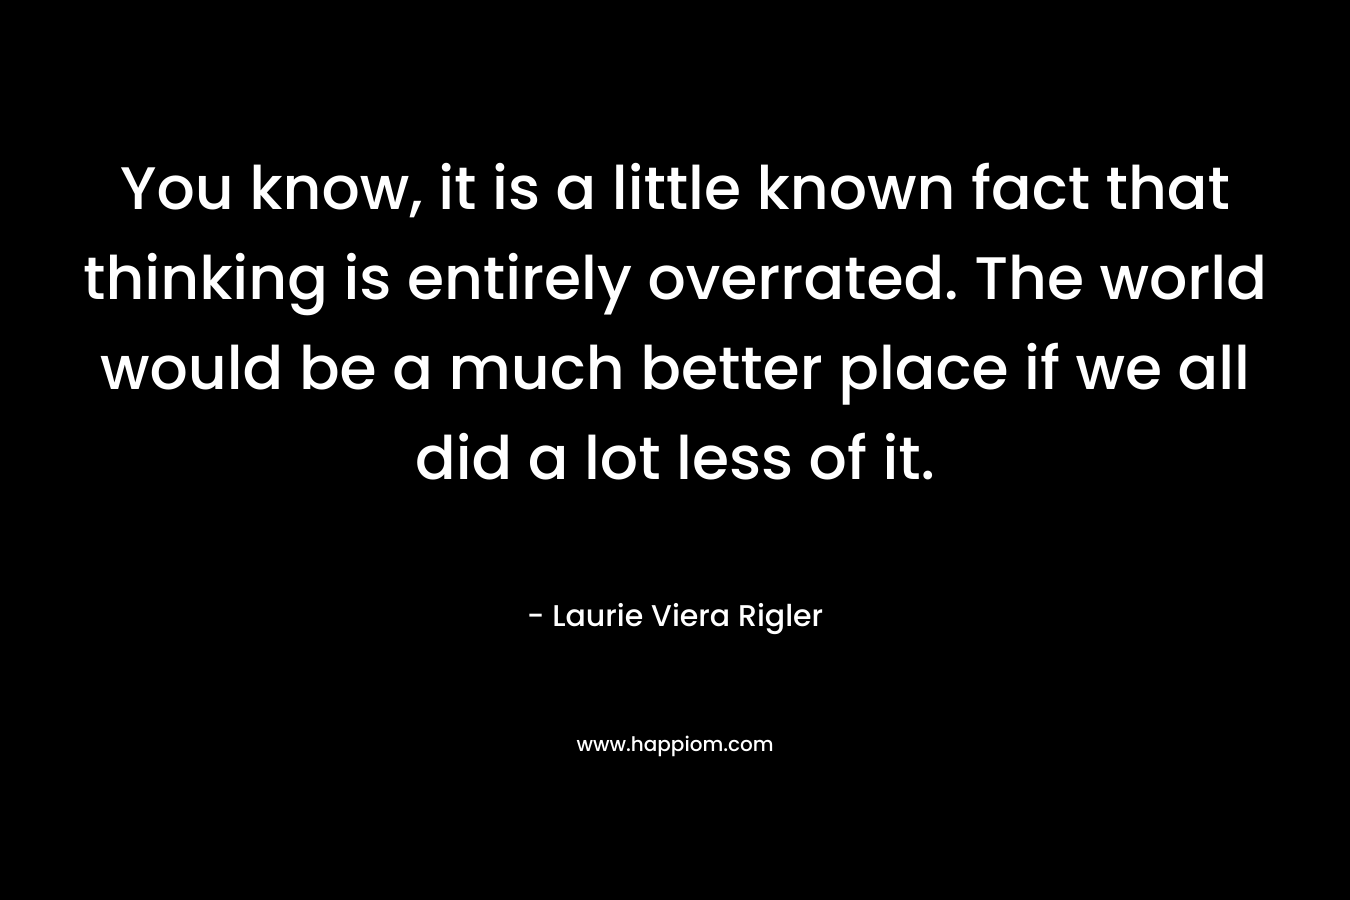 You know, it is a little known fact that thinking is entirely overrated. The world would be a much better place if we all did a lot less of it. – Laurie Viera Rigler